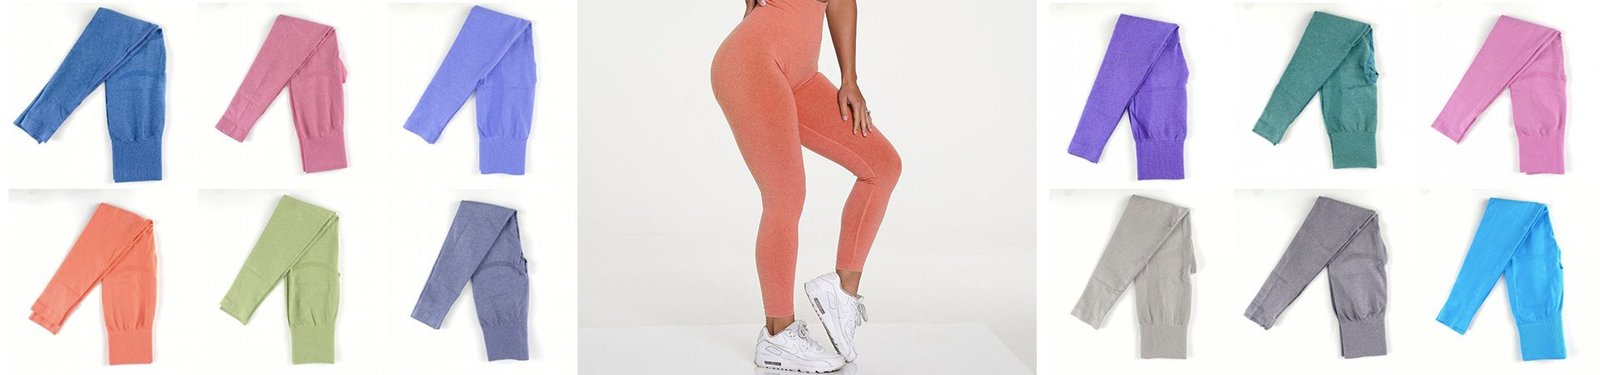 Private Label Seamless Solid Color Yoga Pants